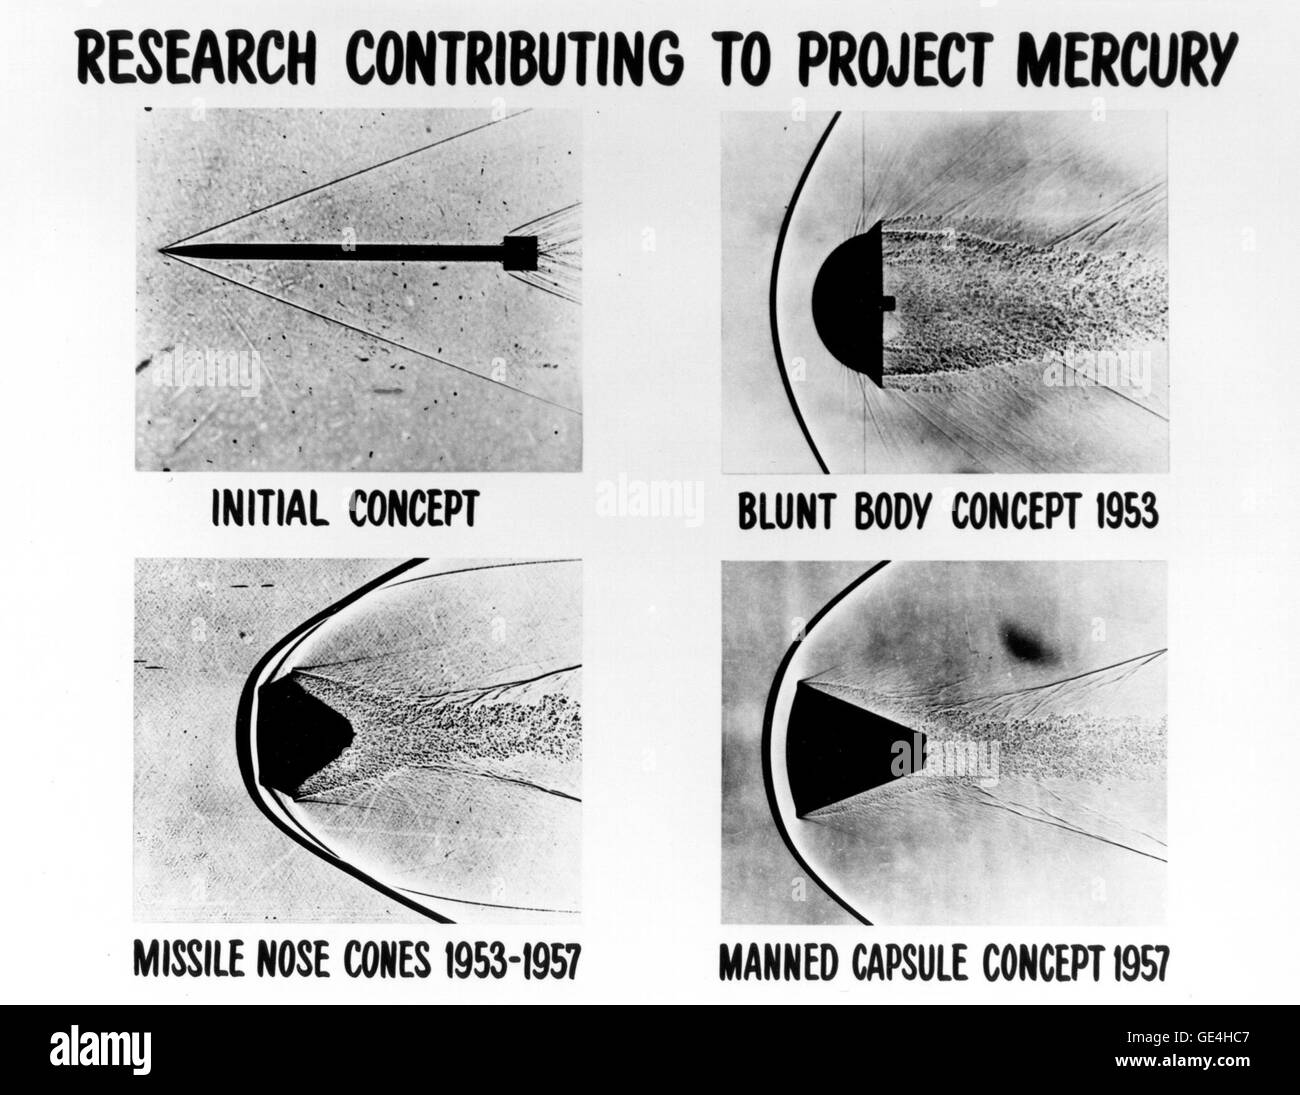 These four shadowgraph images represent early re-entry vehicle concepts. A shadowgraph is a process that makes visible the disturbances that occur in a fluid flow at high velocity, in which light passing through a flowing fluid is refracted by the density gradients in the fluid resulting in bright and dark areas on a screen placed behind the fluid.H. Julian Allen pioneered and developed the Blunt Body Theory which made possible the heat shield designs that were embodied in the Mercury, Gemini and Apollo space capsules, enabling astronauts to survive the firey re-entry into Earth's atmosphere.  Stock Photo